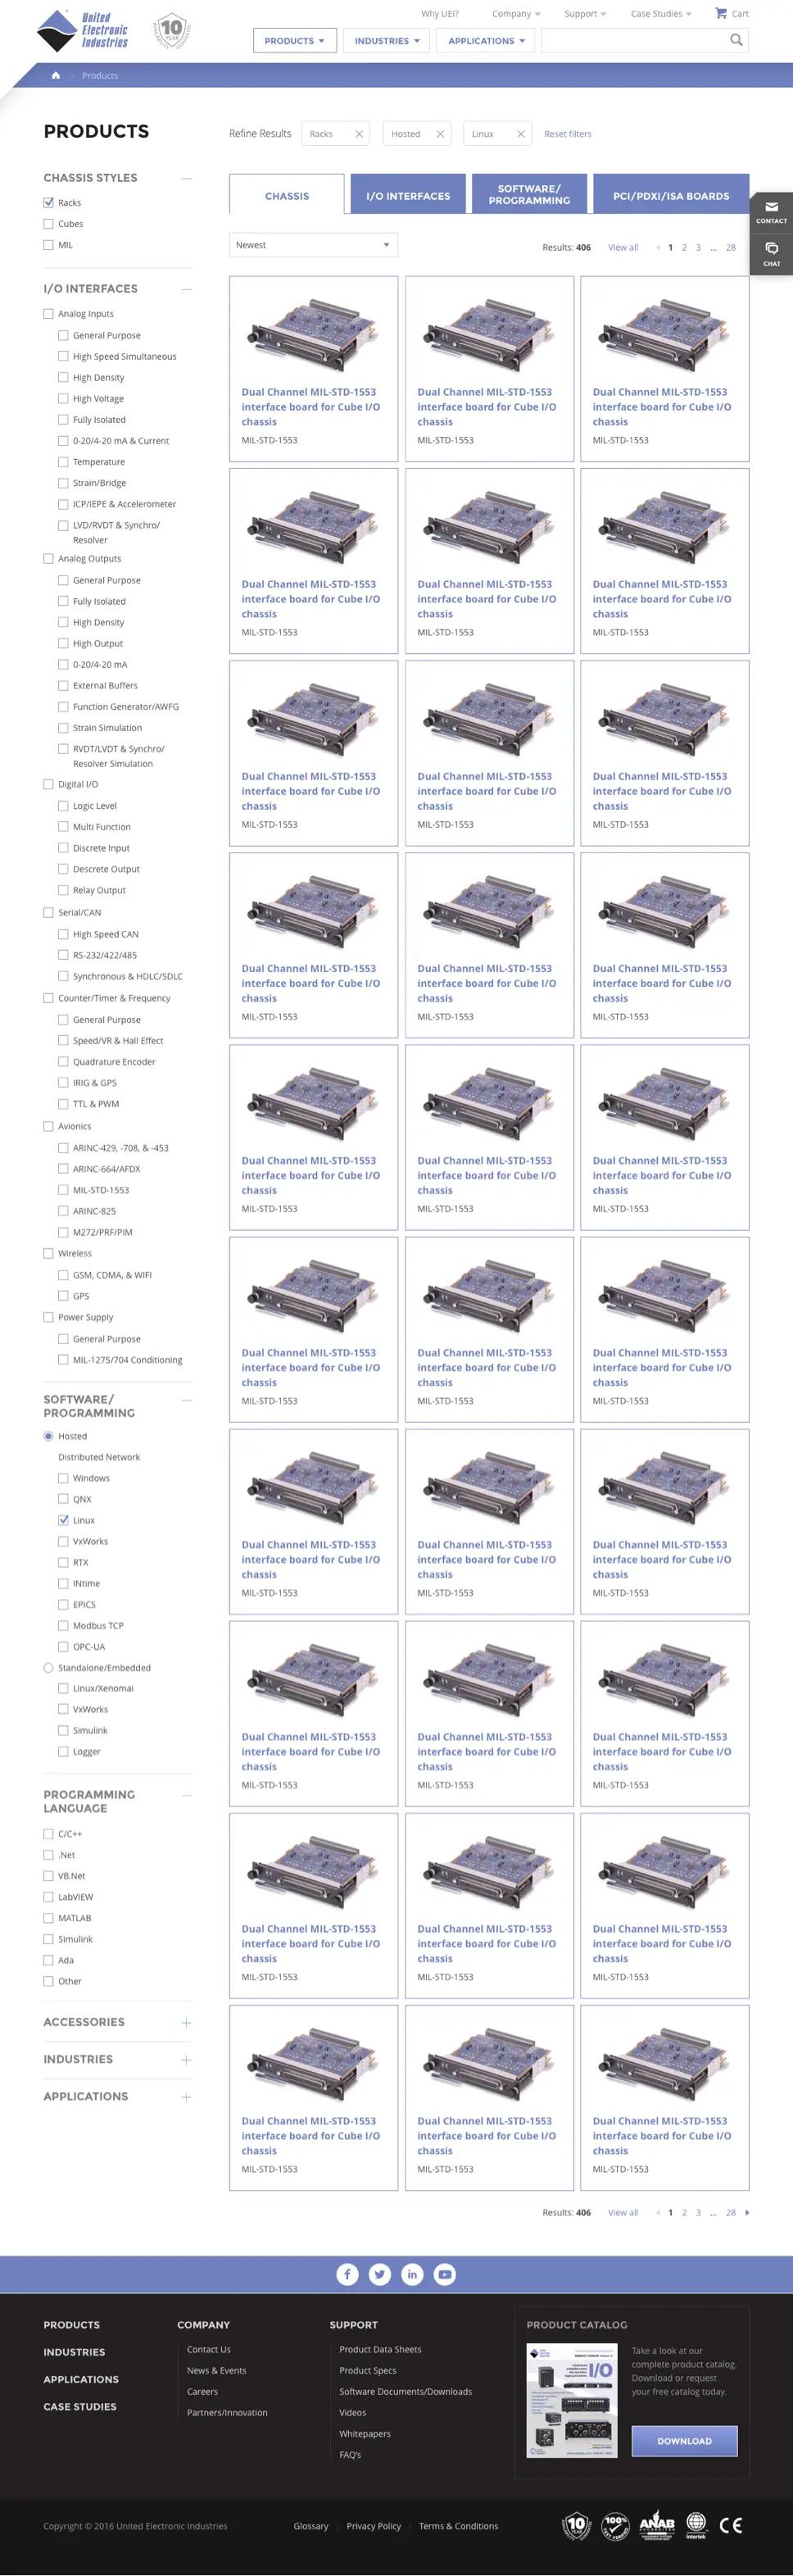 A screenshot of United Electronic Industries' "Products" page.